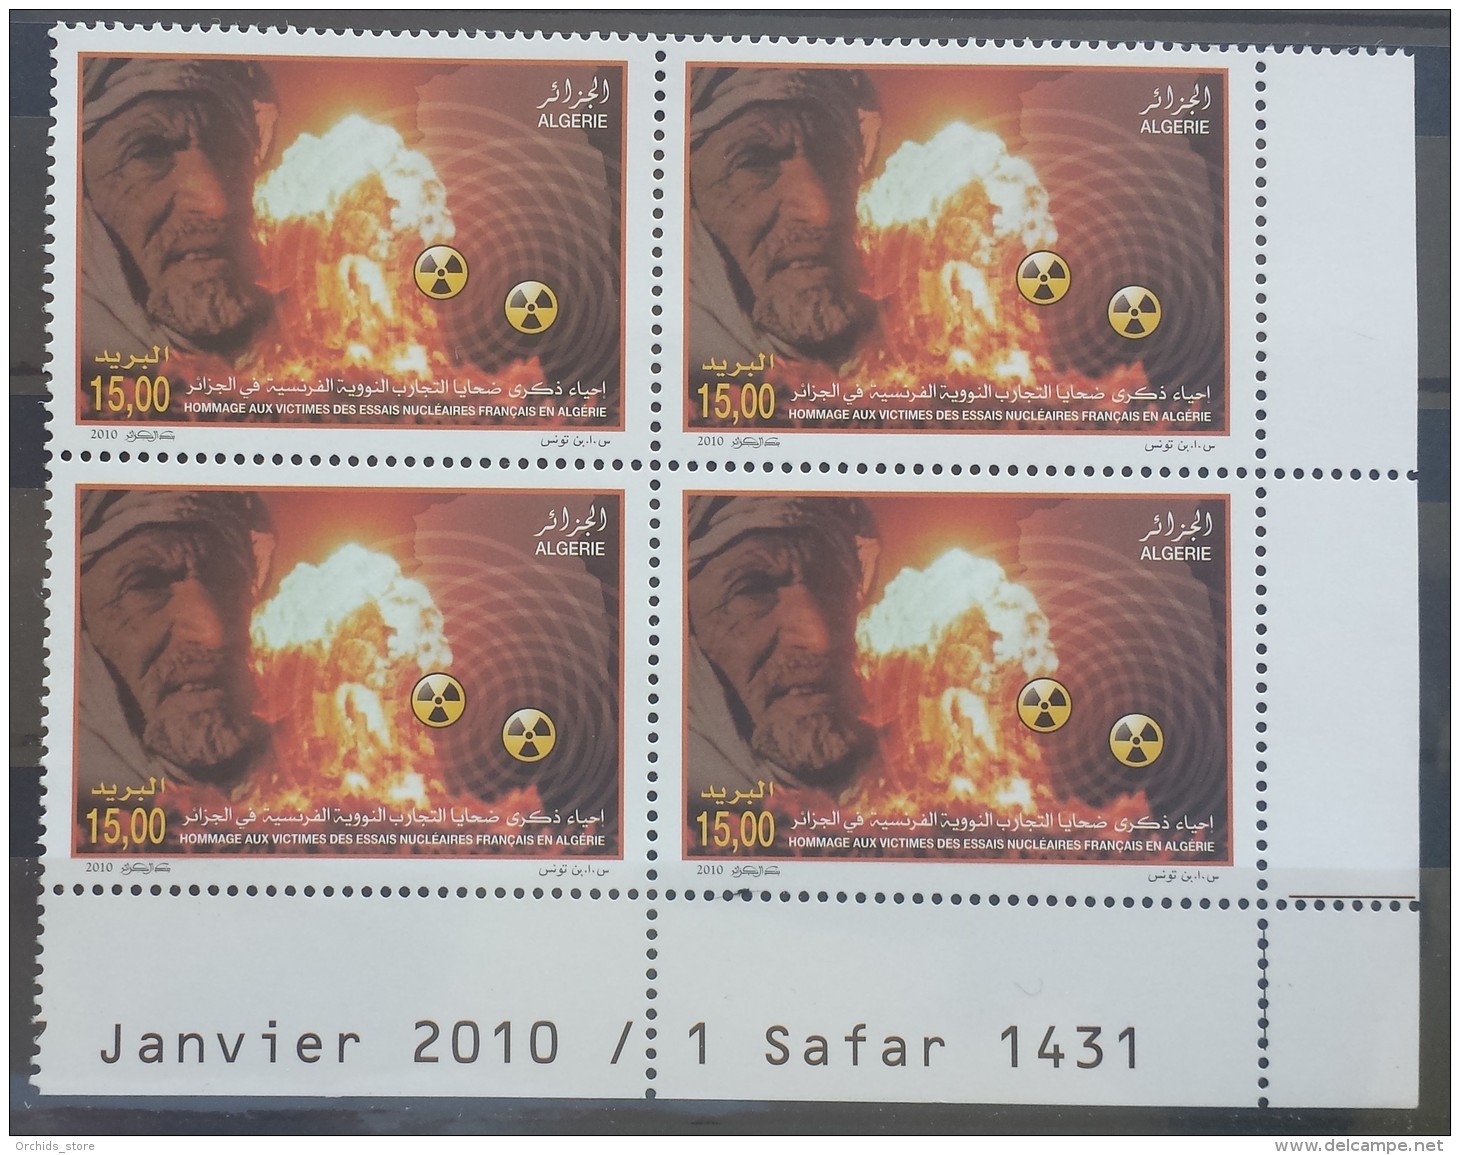 Algeria 2010 MNH Stamp - Tribute To The Victims Of French Nuclear Tests In Algeria - Dated Corner Blk/4 - Algeria (1962-...)